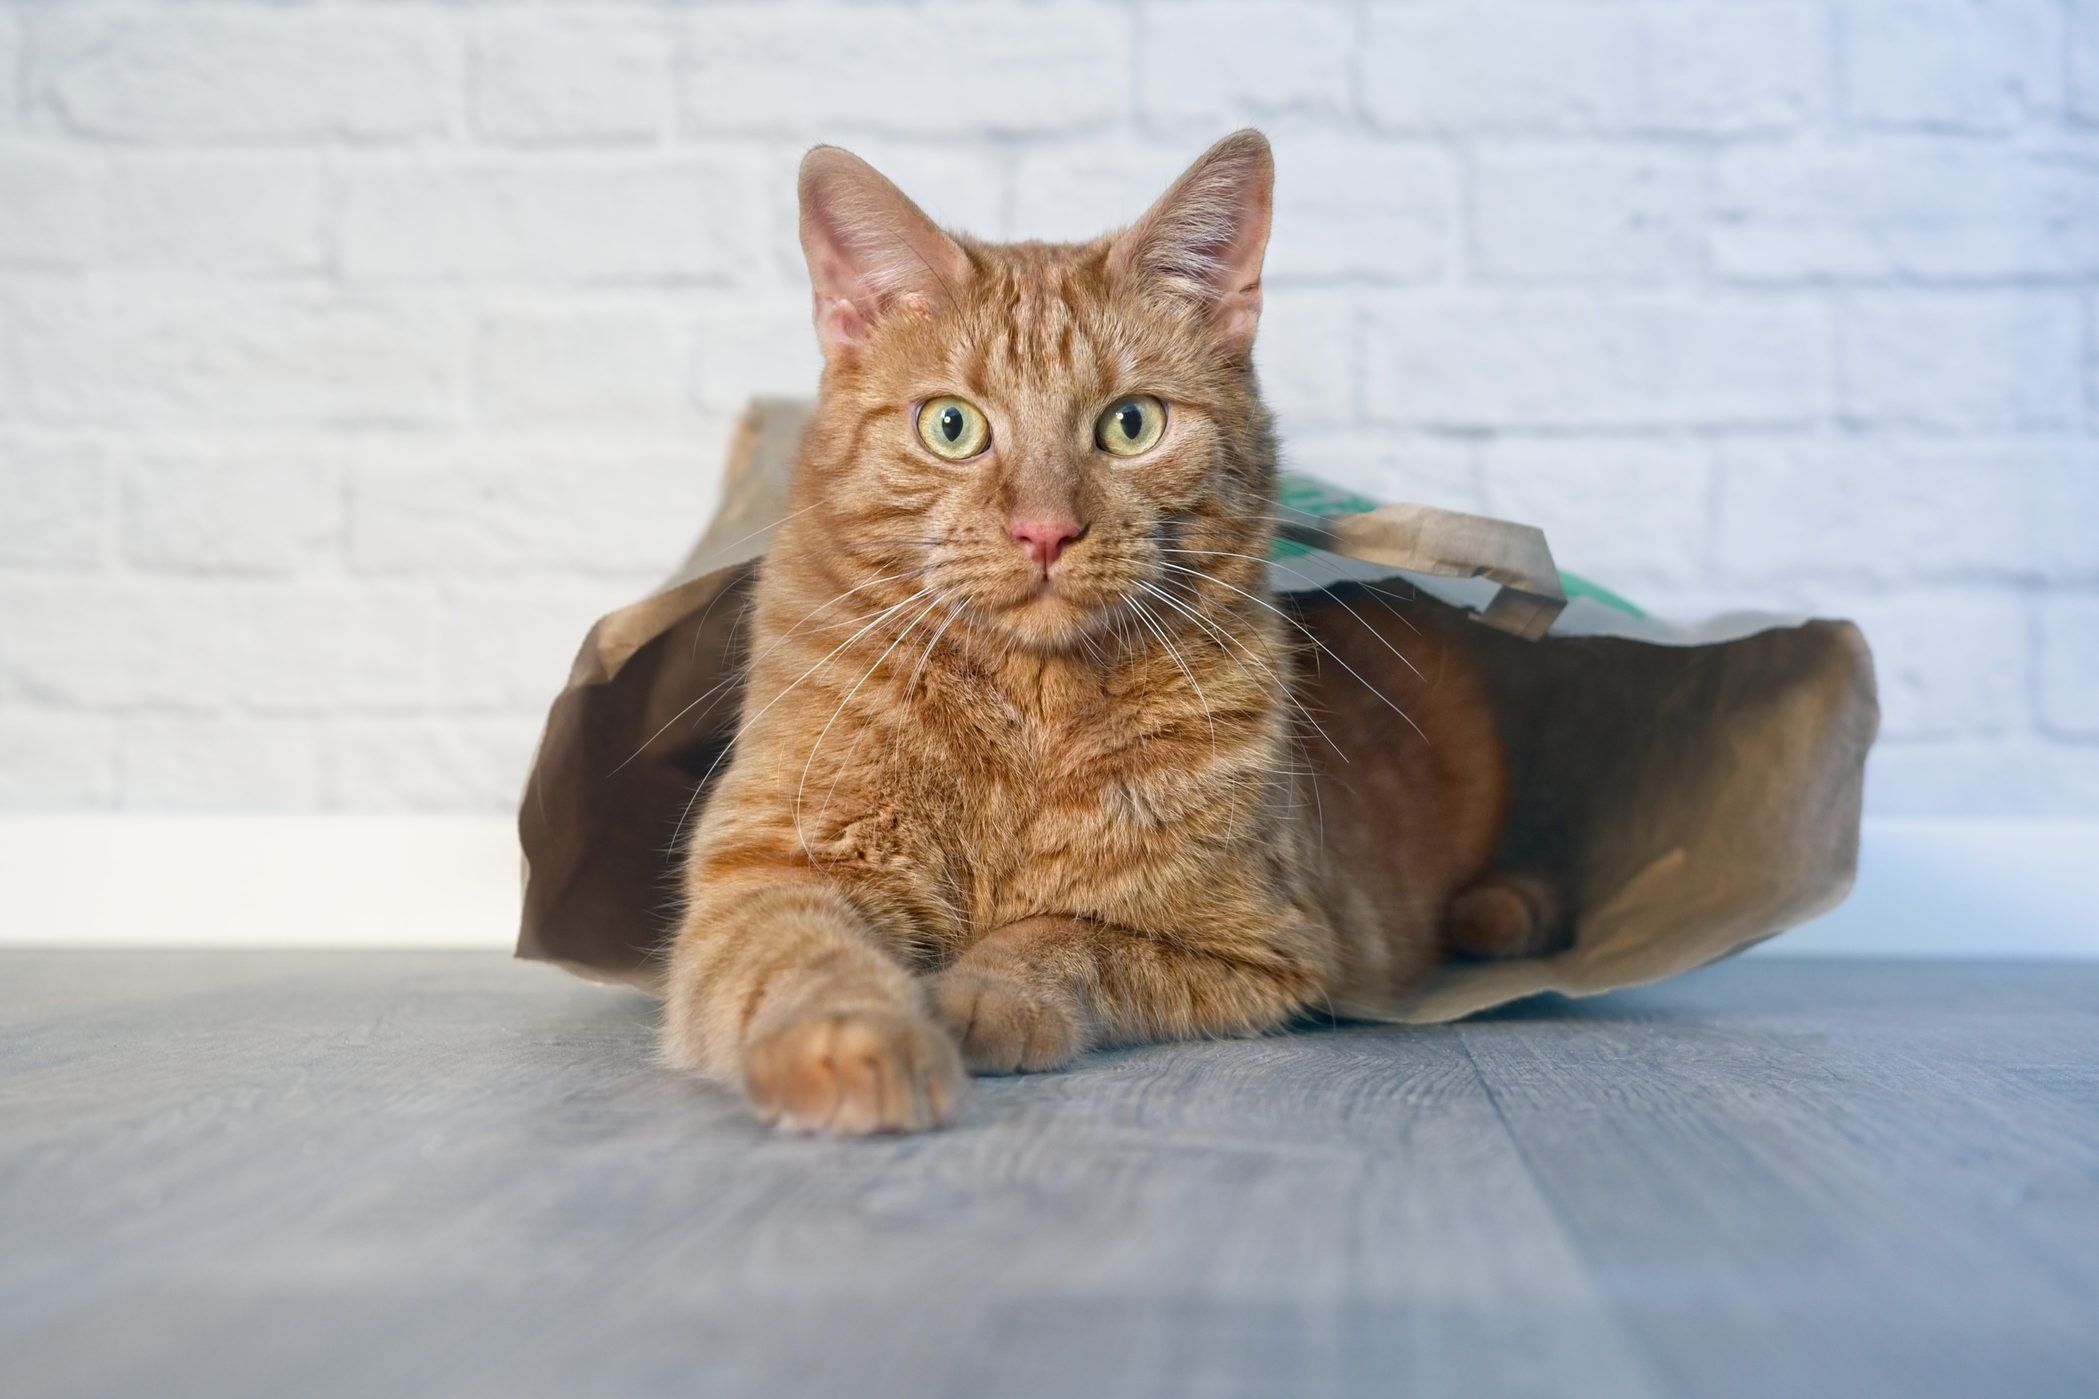 Ginger Cat In A Paper Bag Looking Curious To The Camera.